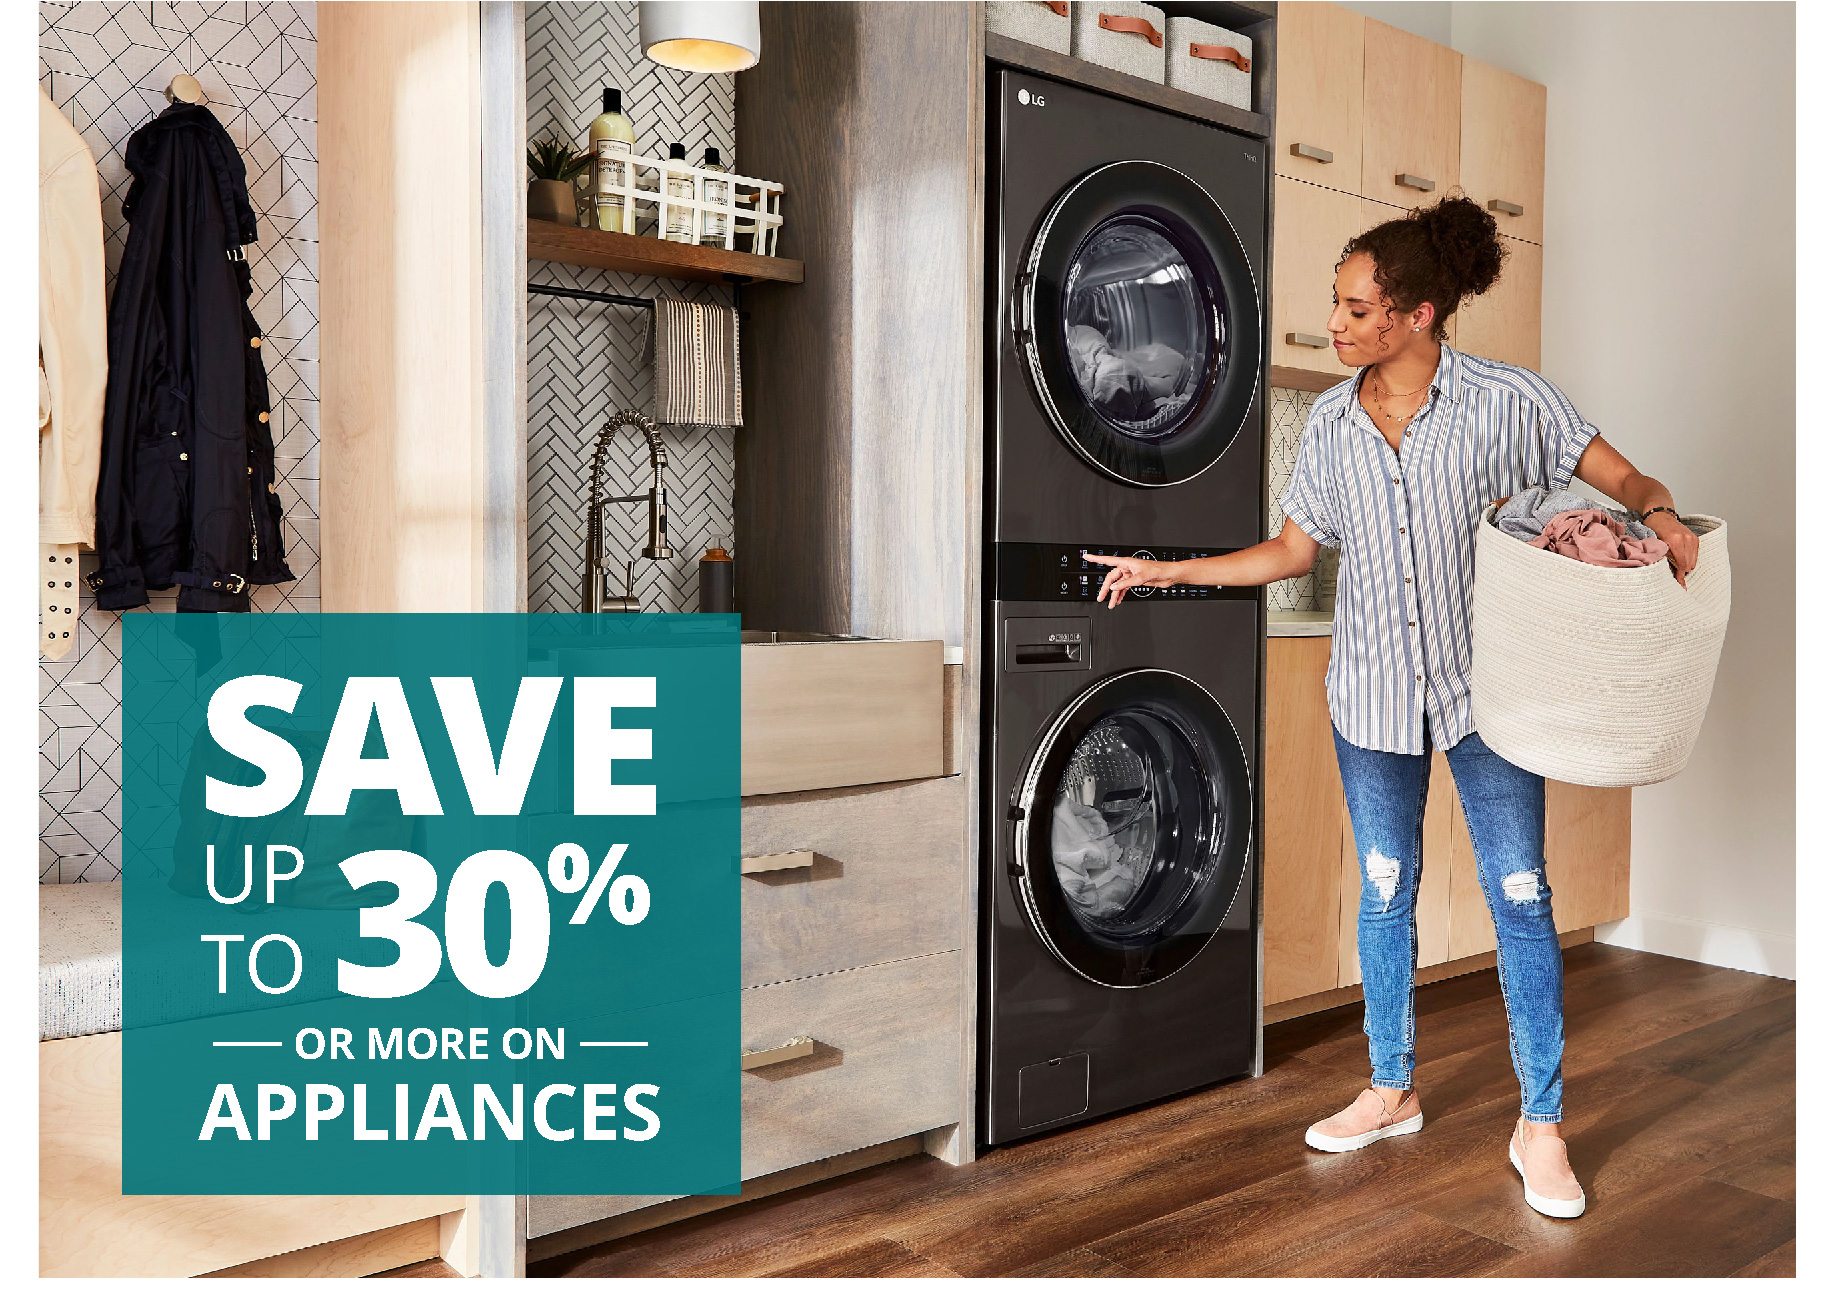 SAVE UP TO 30% OR MORE ON APPLIANCES